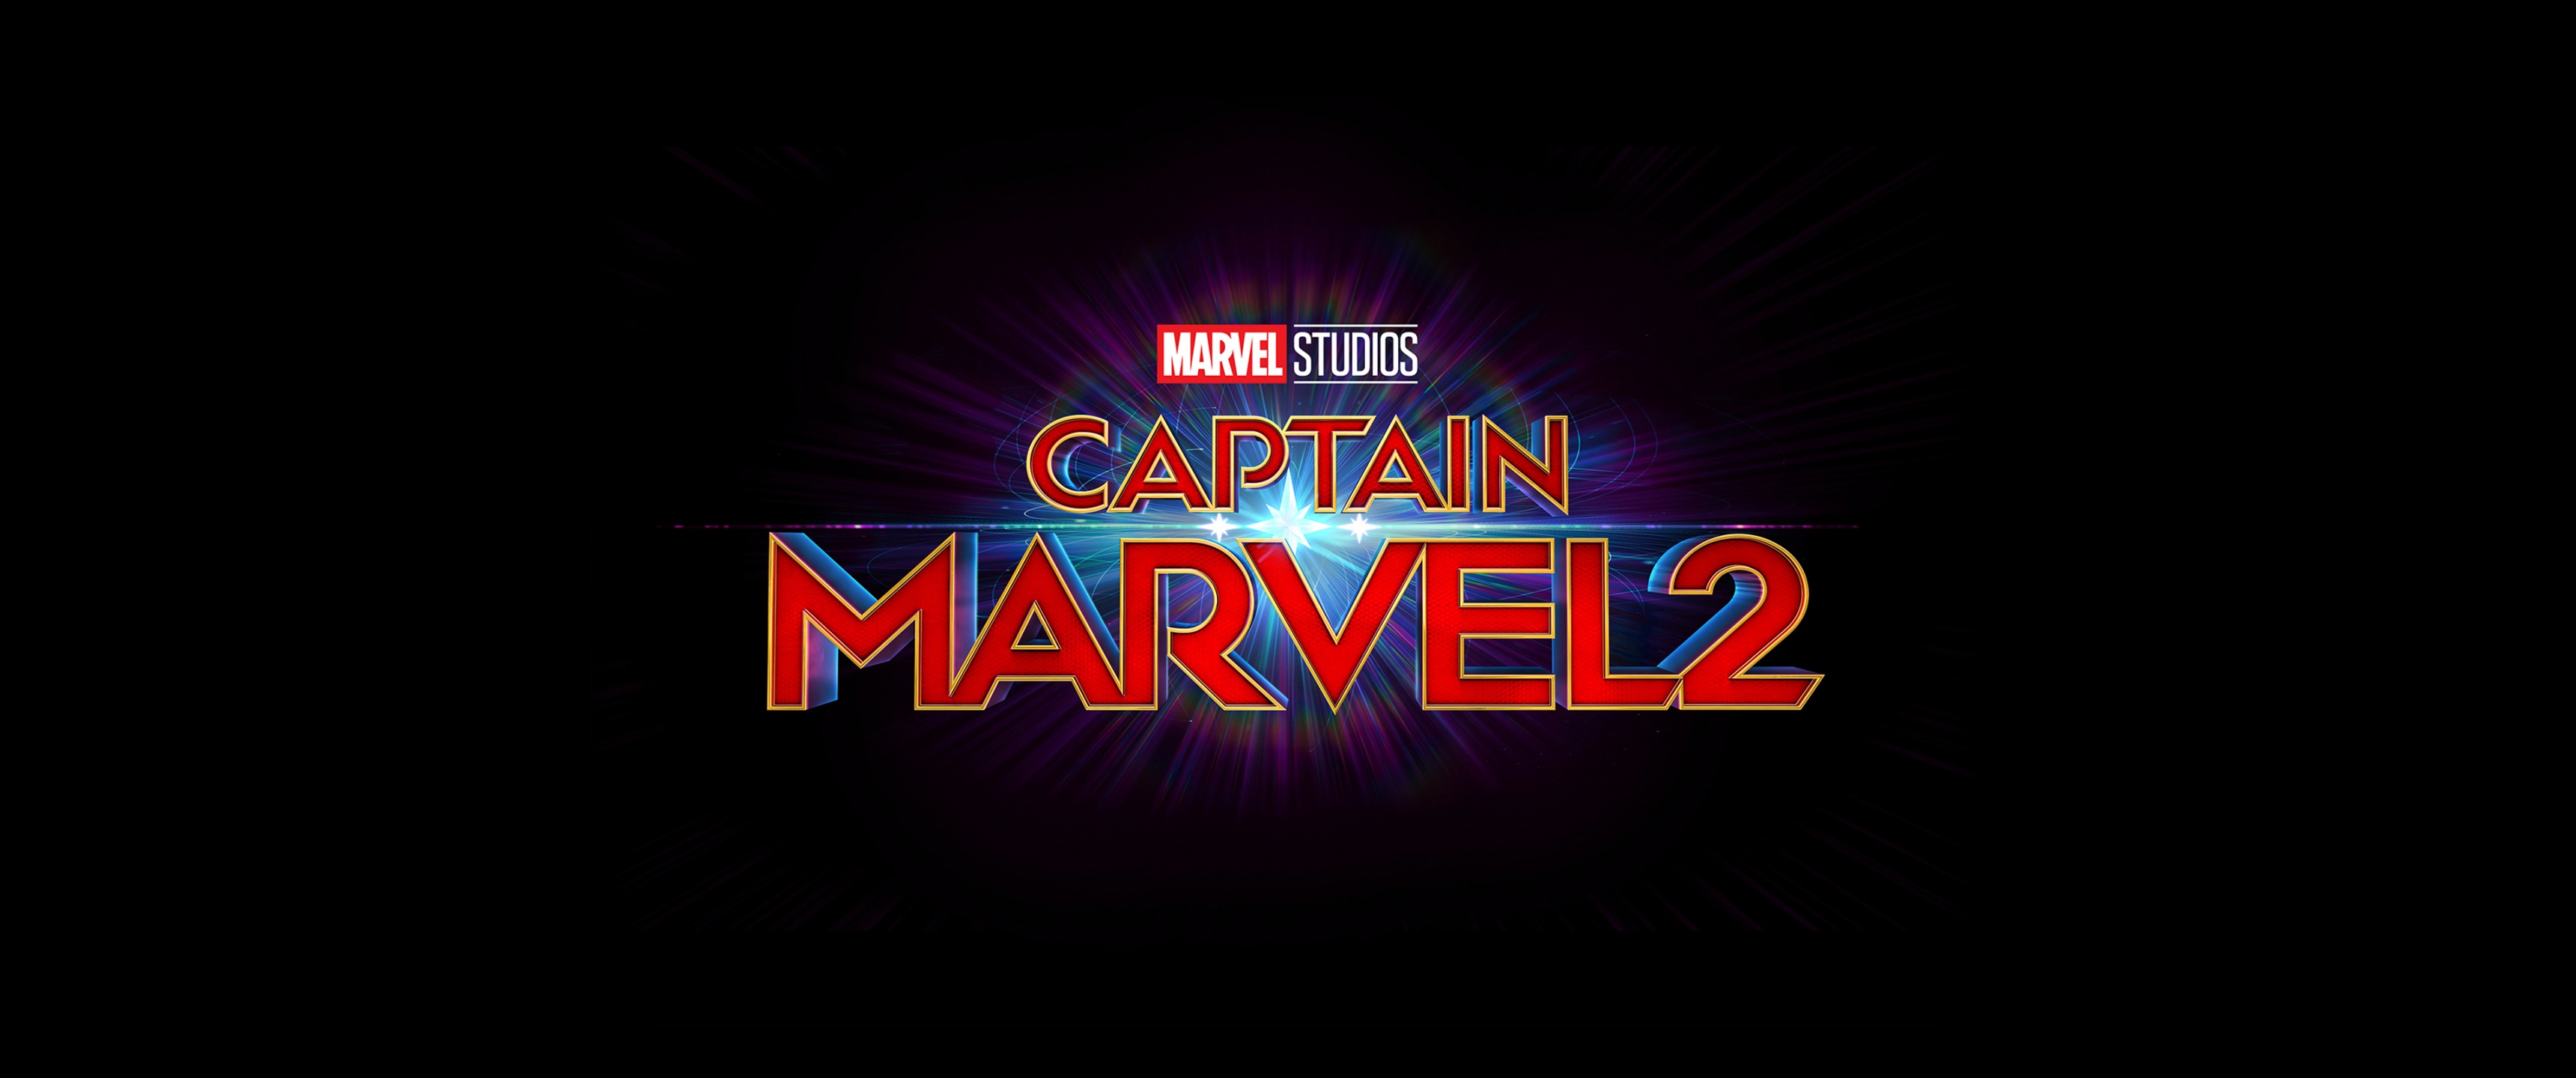 The Marvels Wallpaper 4K, Captain Marvel 2022 Movies, Black background, Movies